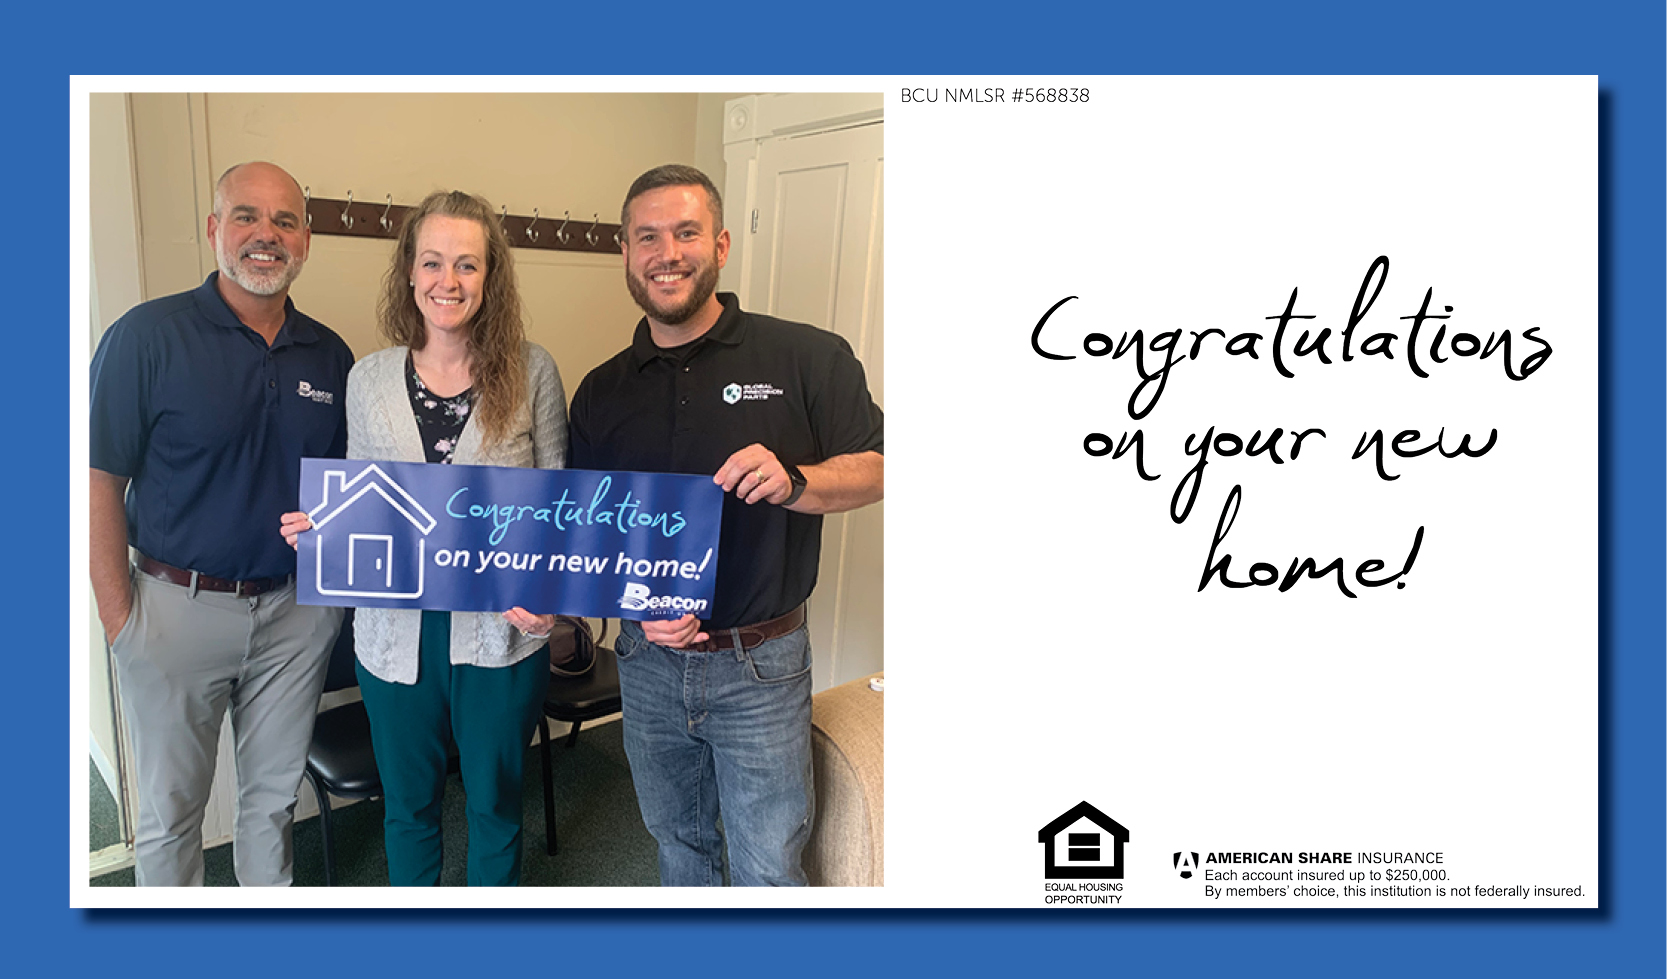 New homeowners Michael and Keeley